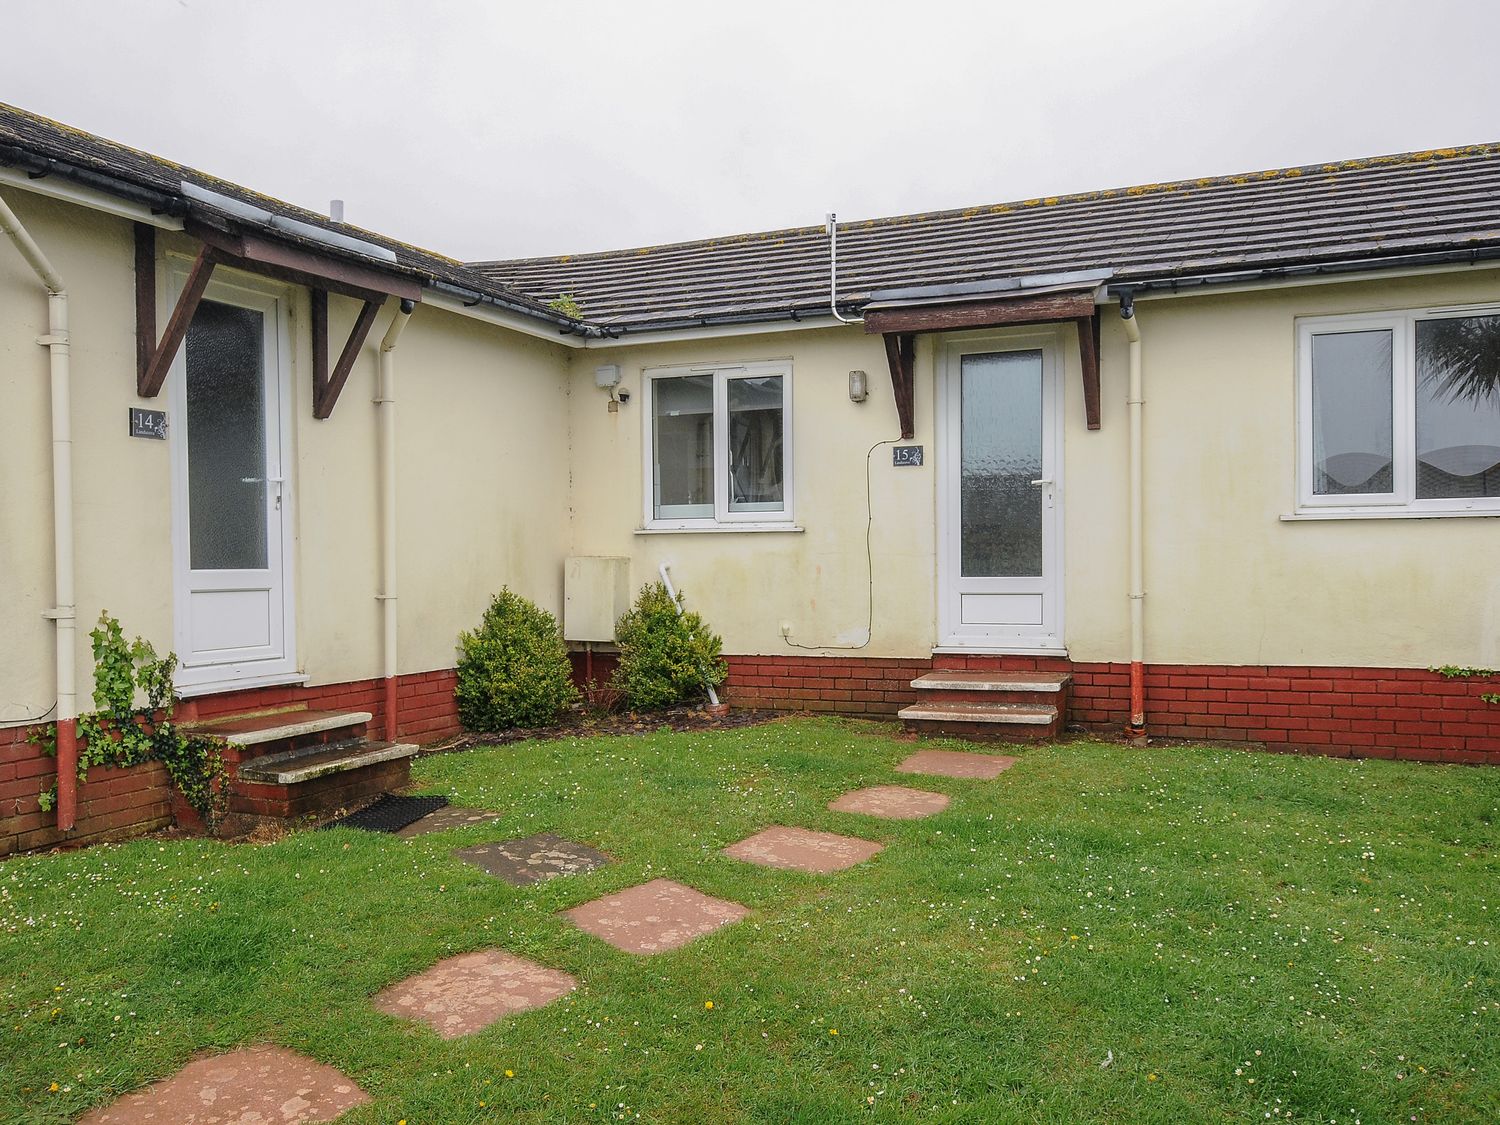 2 Bed Silver Chalet Plot T015 with pets - Devon - 1154786 - photo 1